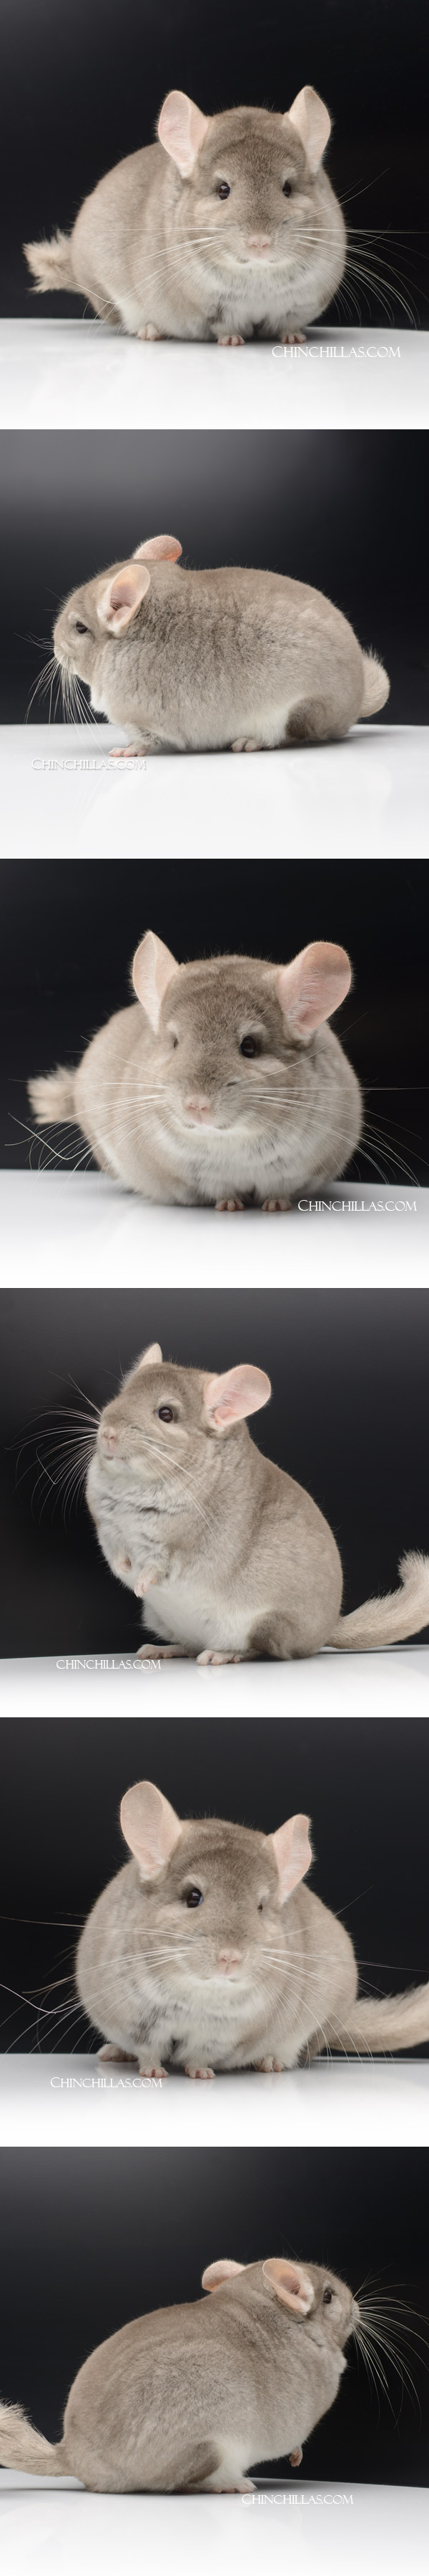 Chinchilla or related item offered for sale or export on Chinchillas.com - 24048 Large Blocky Premium Production Quality Beige Female Chinchilla